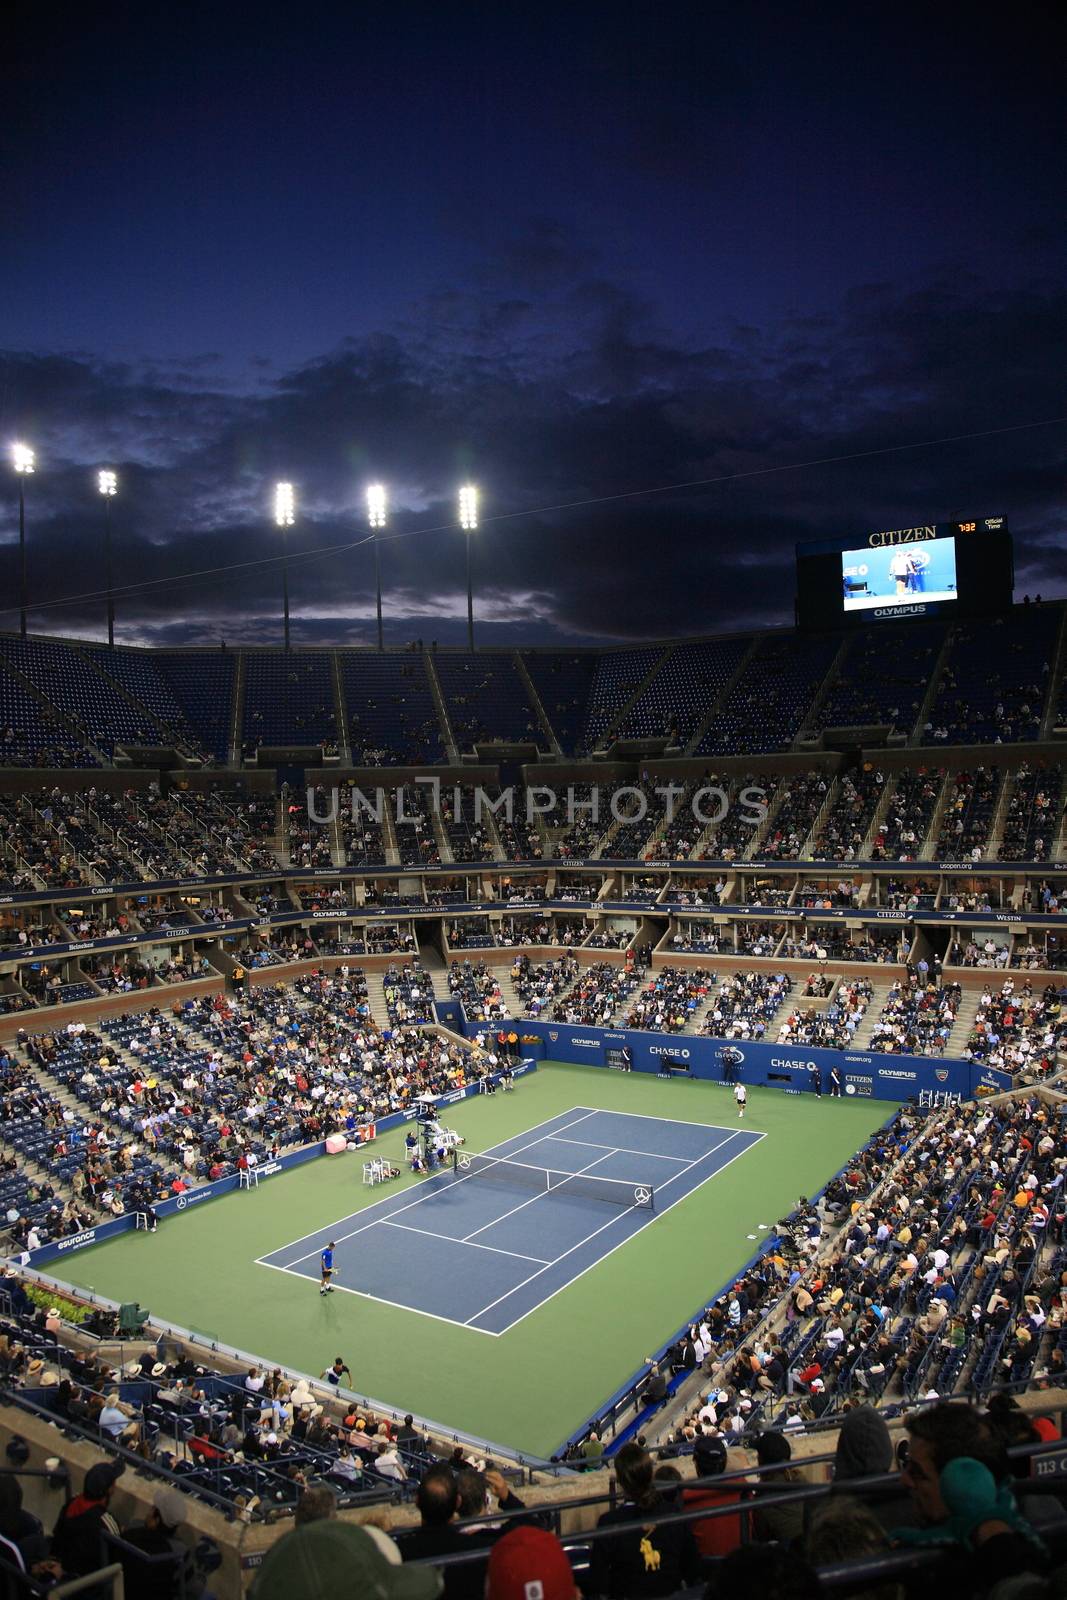 Ashe Stadium at Night - US Open Tennis by Ffooter